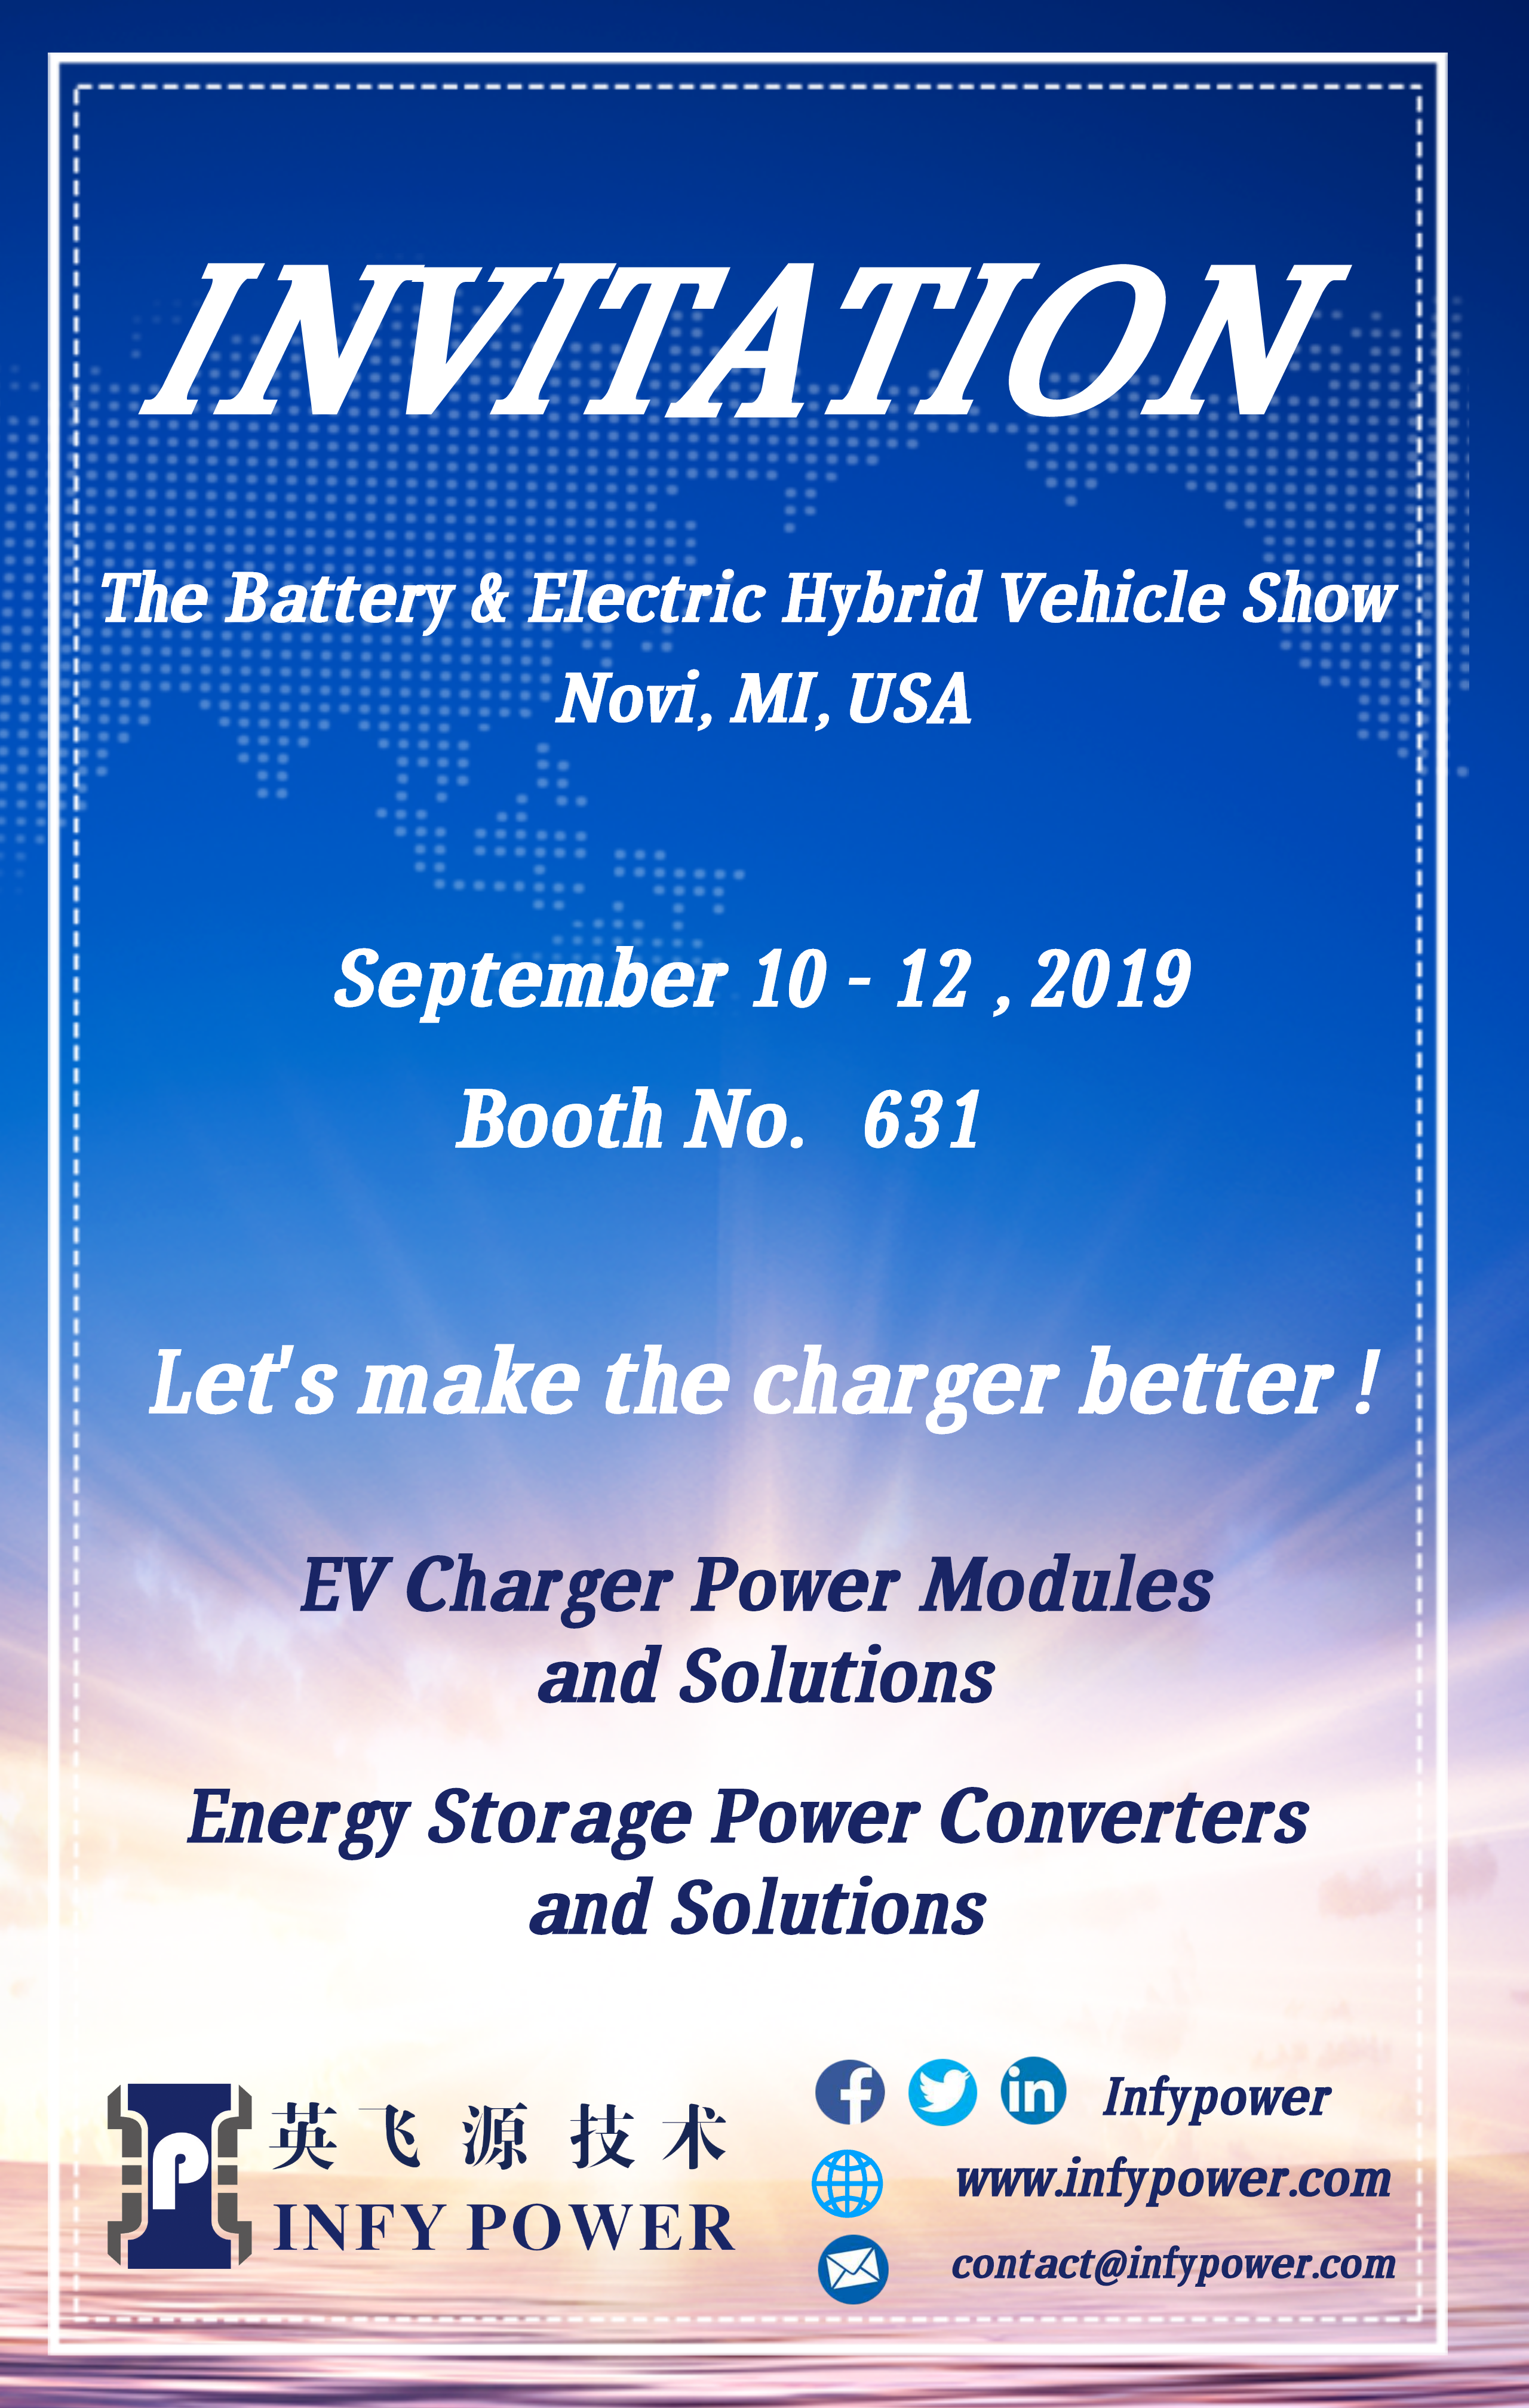 Infypower # nos EUA # The Battery & Electric Hybrid Vehicle Show